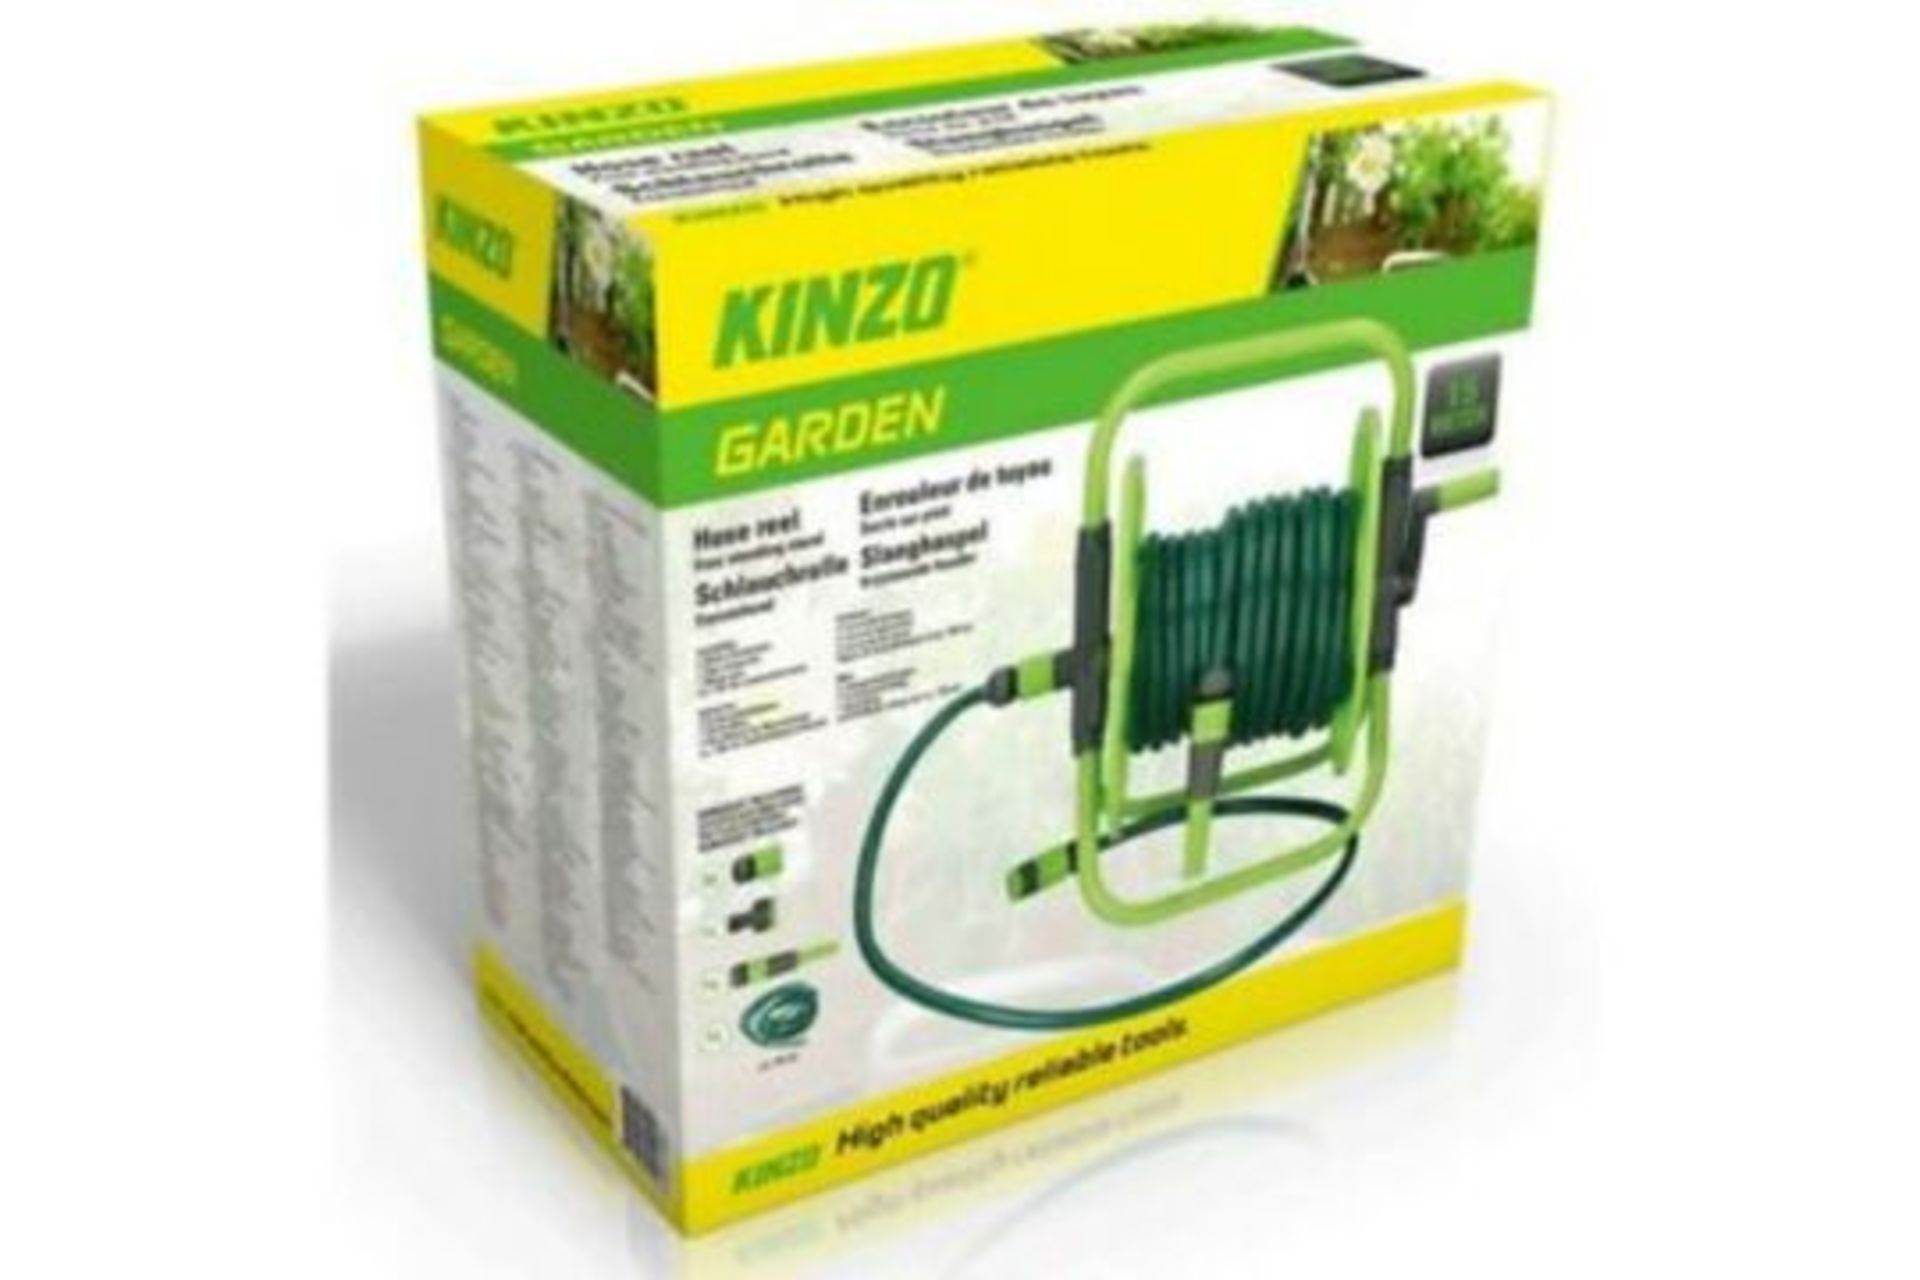 BRAND NEW KINZO 15M HOSE AND REEL WITH ATTACTMENTS